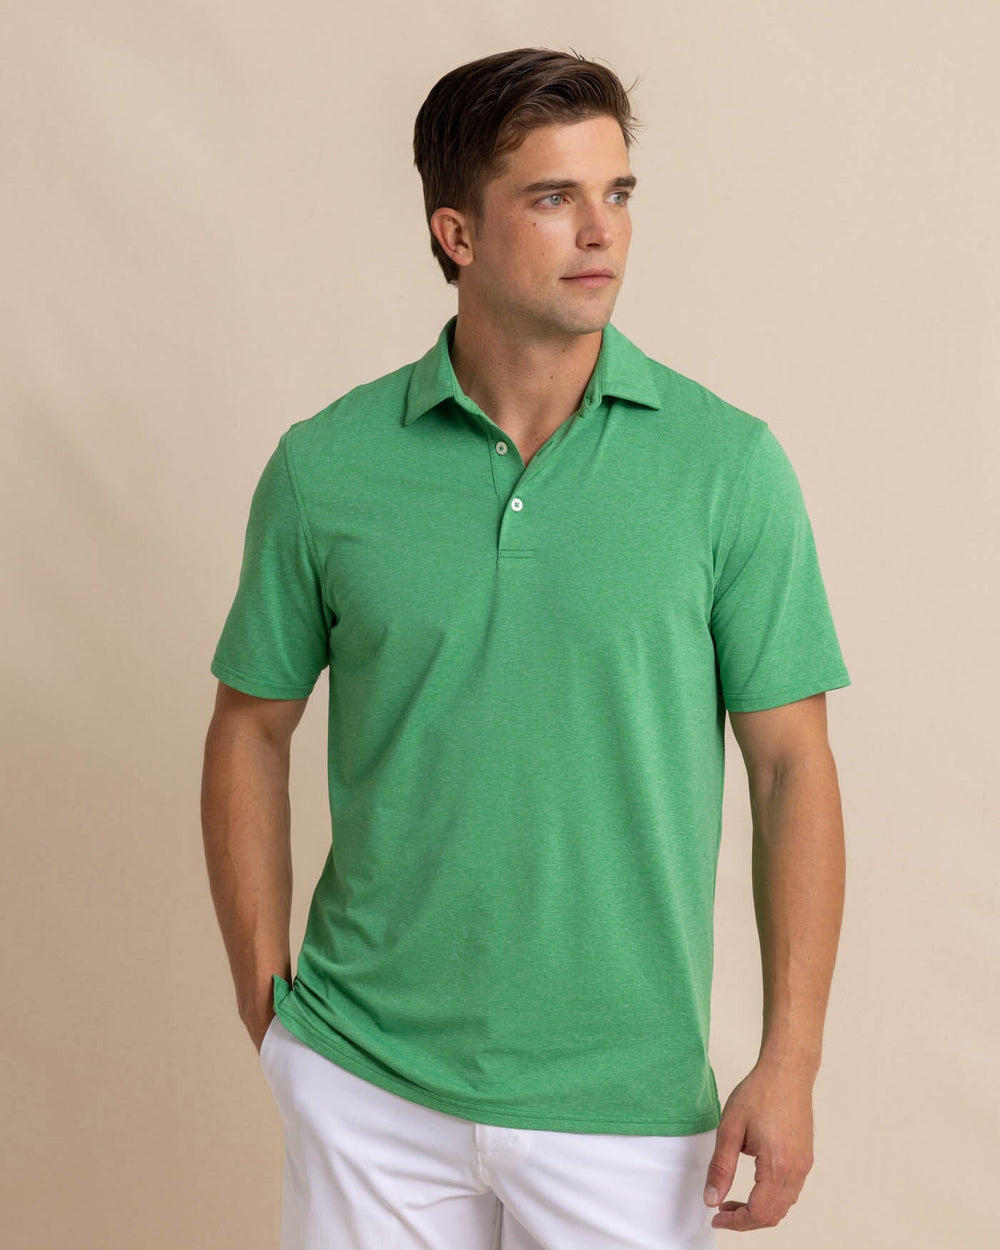 The front view of the Southern Tide brrr-eeze-heather-performance-polo-shirt by Southern Tide - Heather Kelly Green